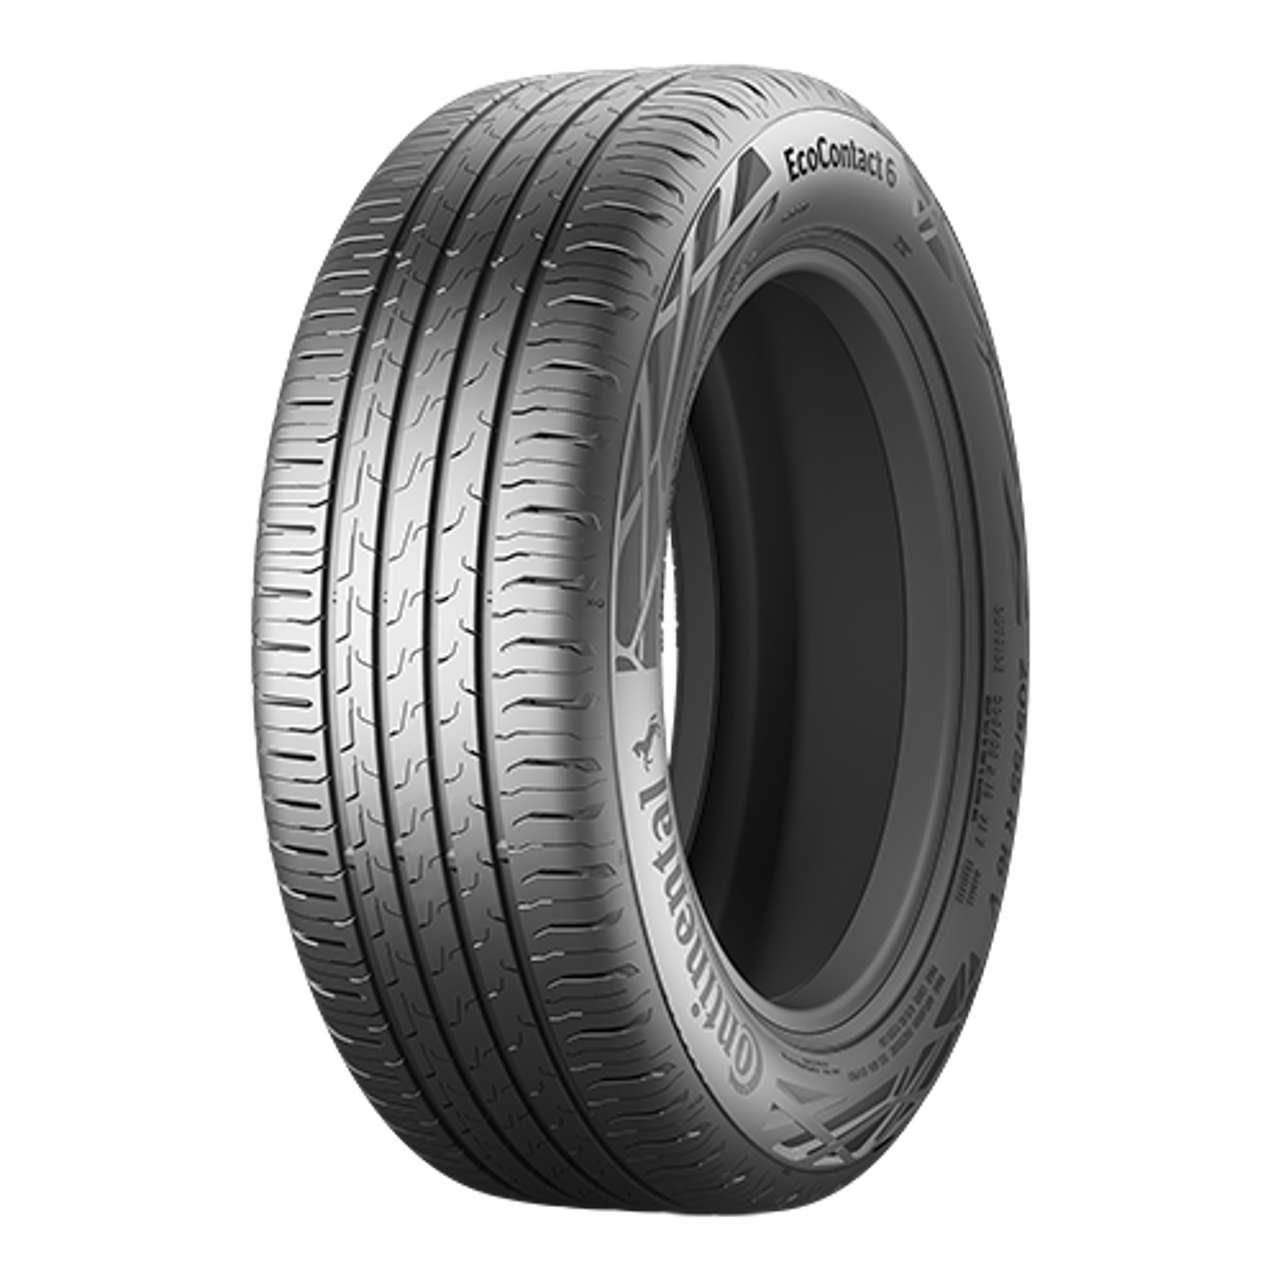 CONTINENTAL ECOCONTACT 6Q (MO) (EVc) 275/45R21 107Y CONTISILENT FR BSW